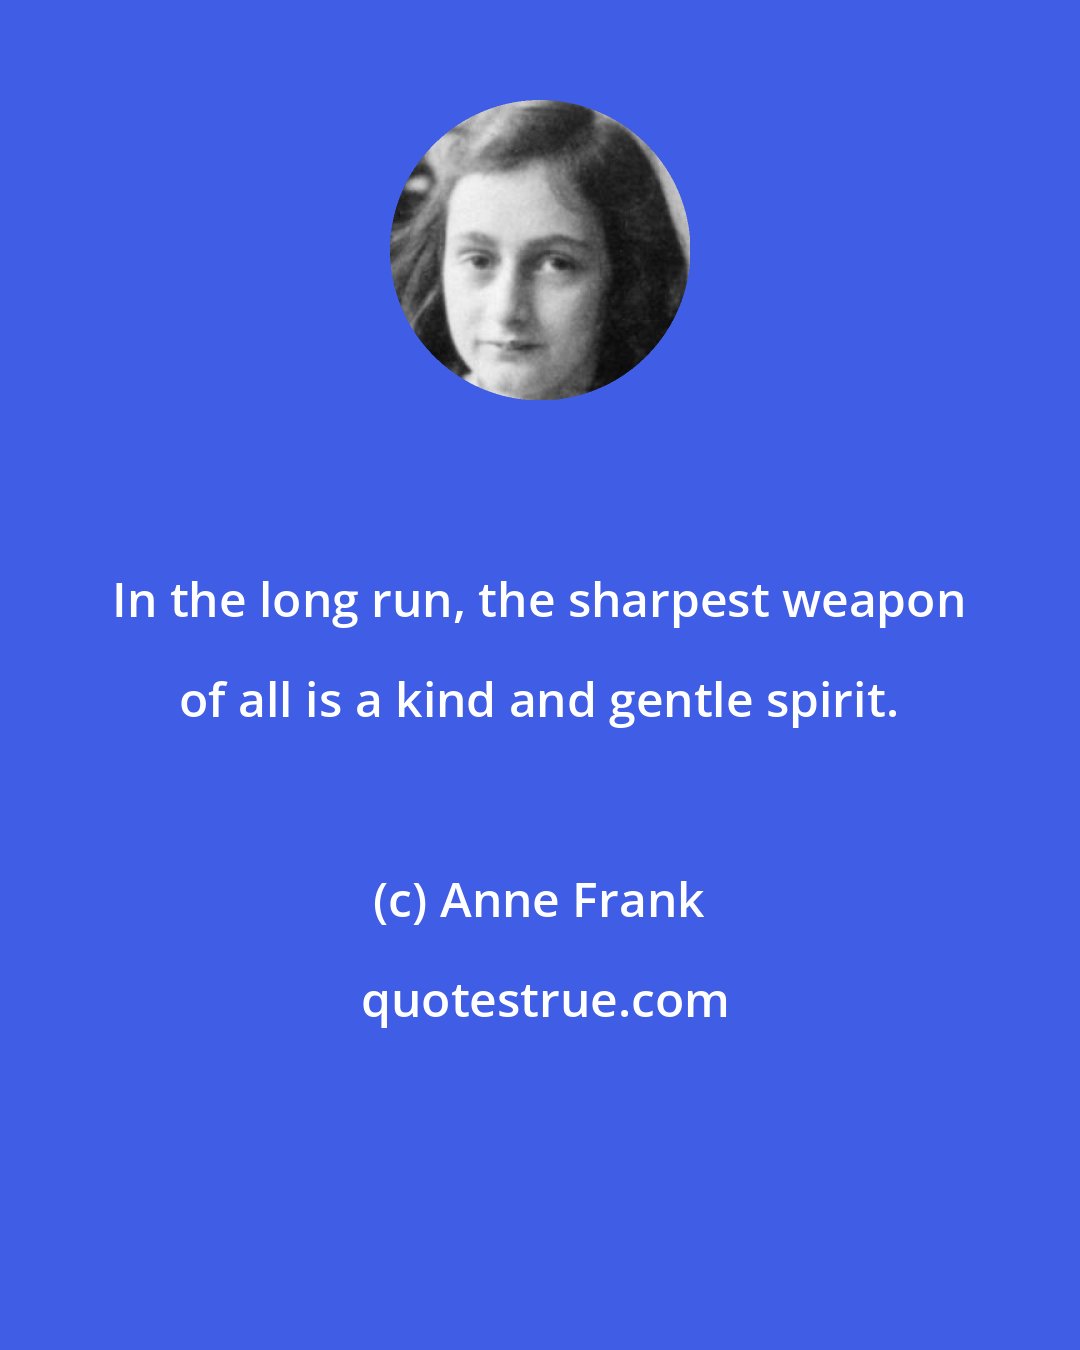 Anne Frank: In the long run, the sharpest weapon of all is a kind and gentle spirit.